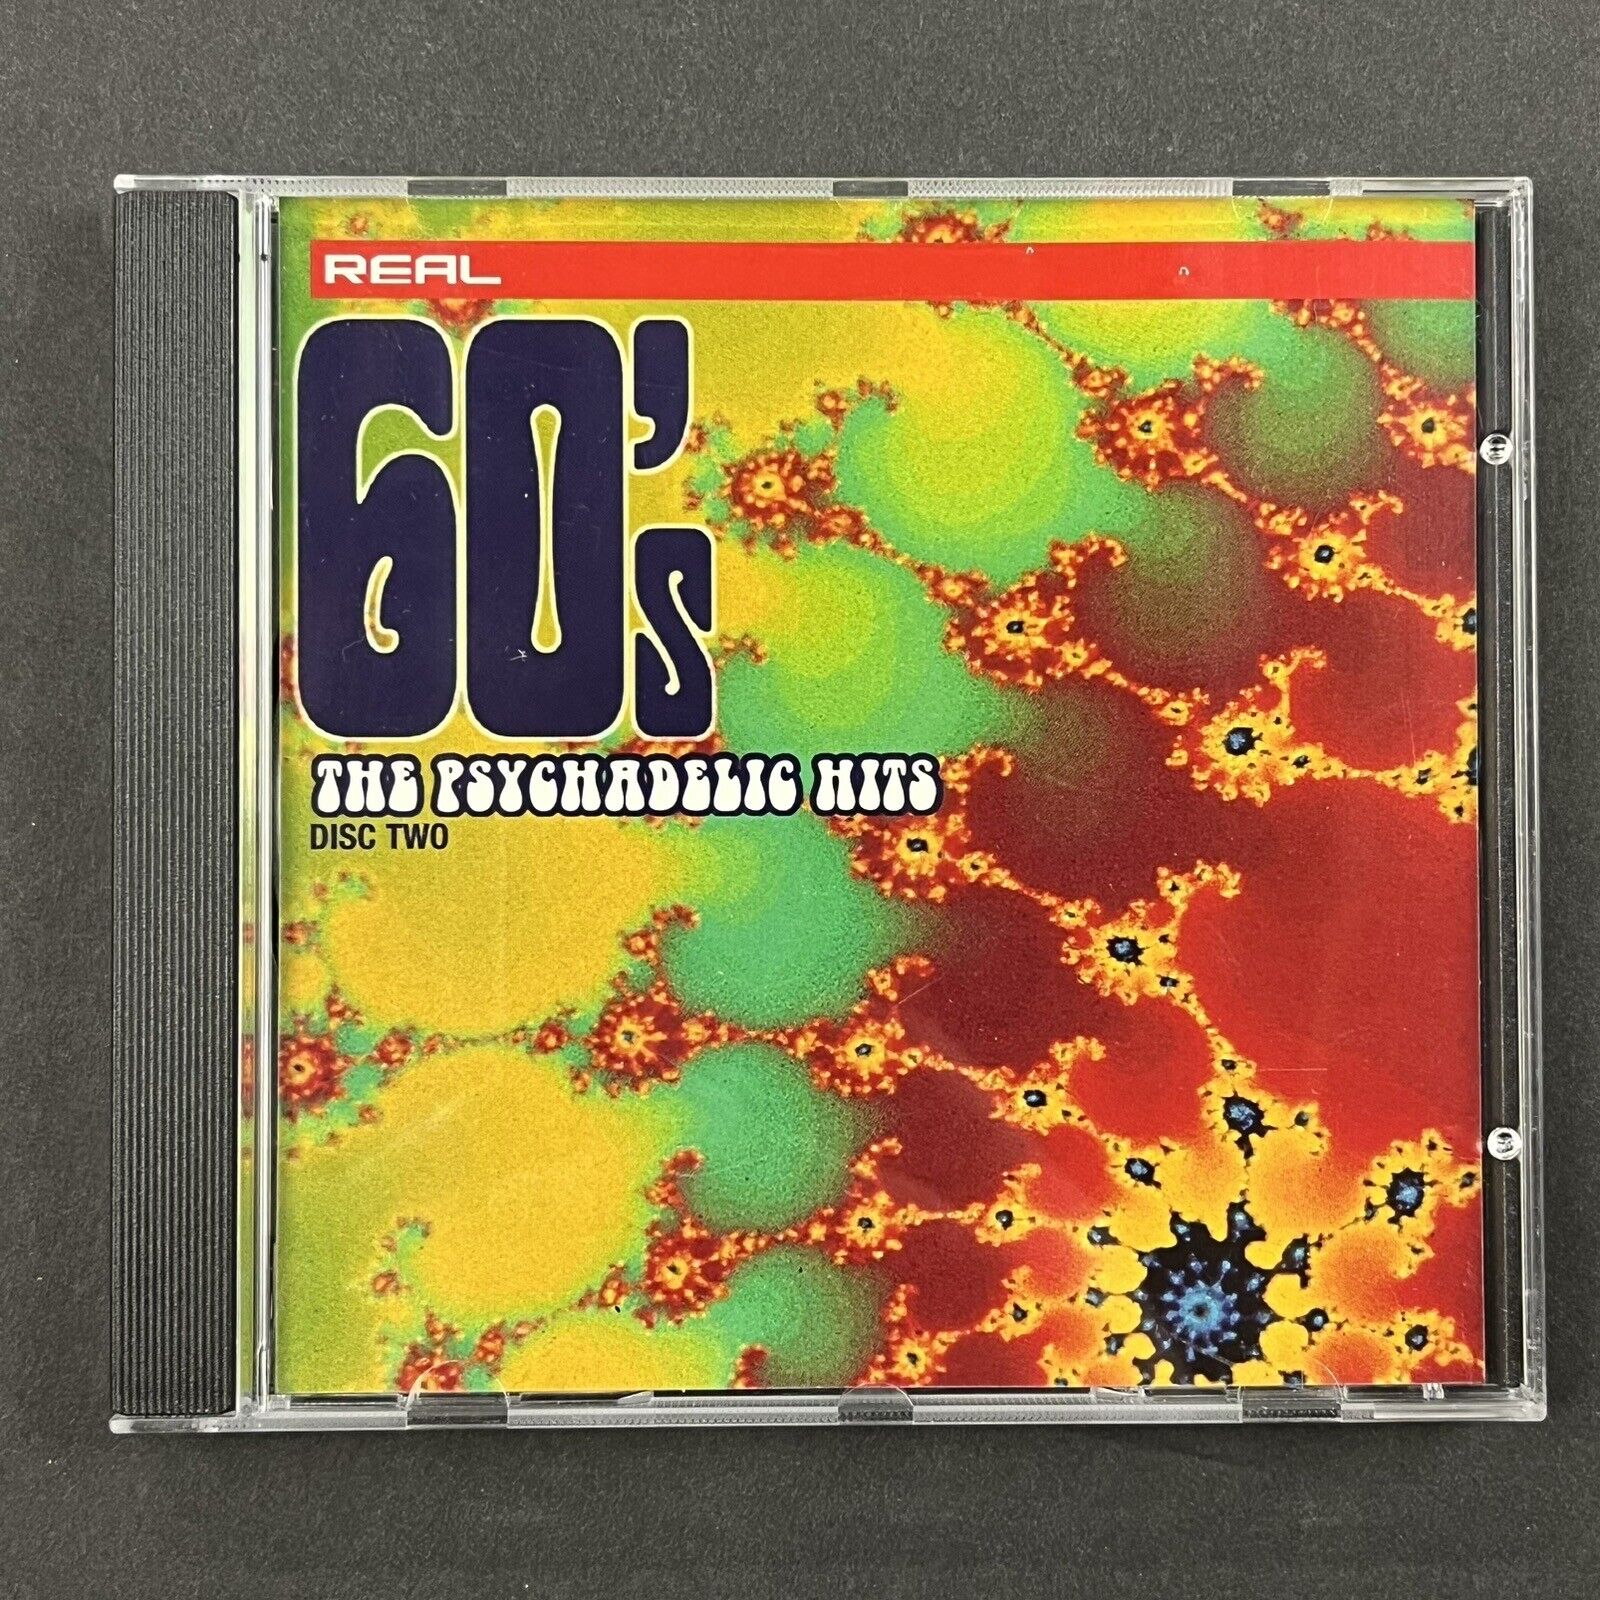 Various - Real 60s - Psychedelic Hits Disc 2 CD